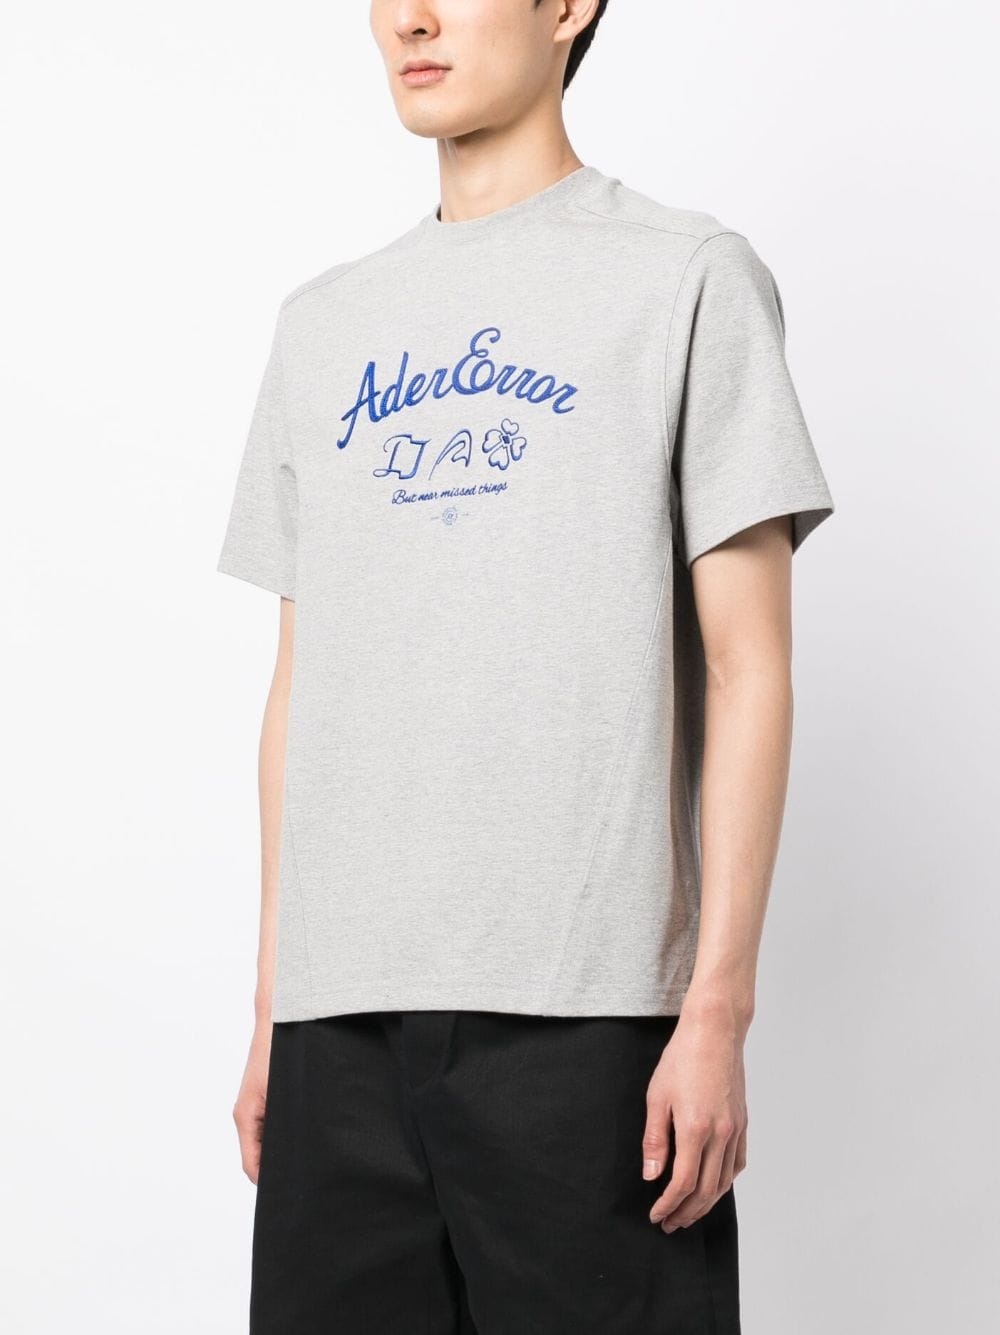 embroidered-logo cotton T-Shirt - 3